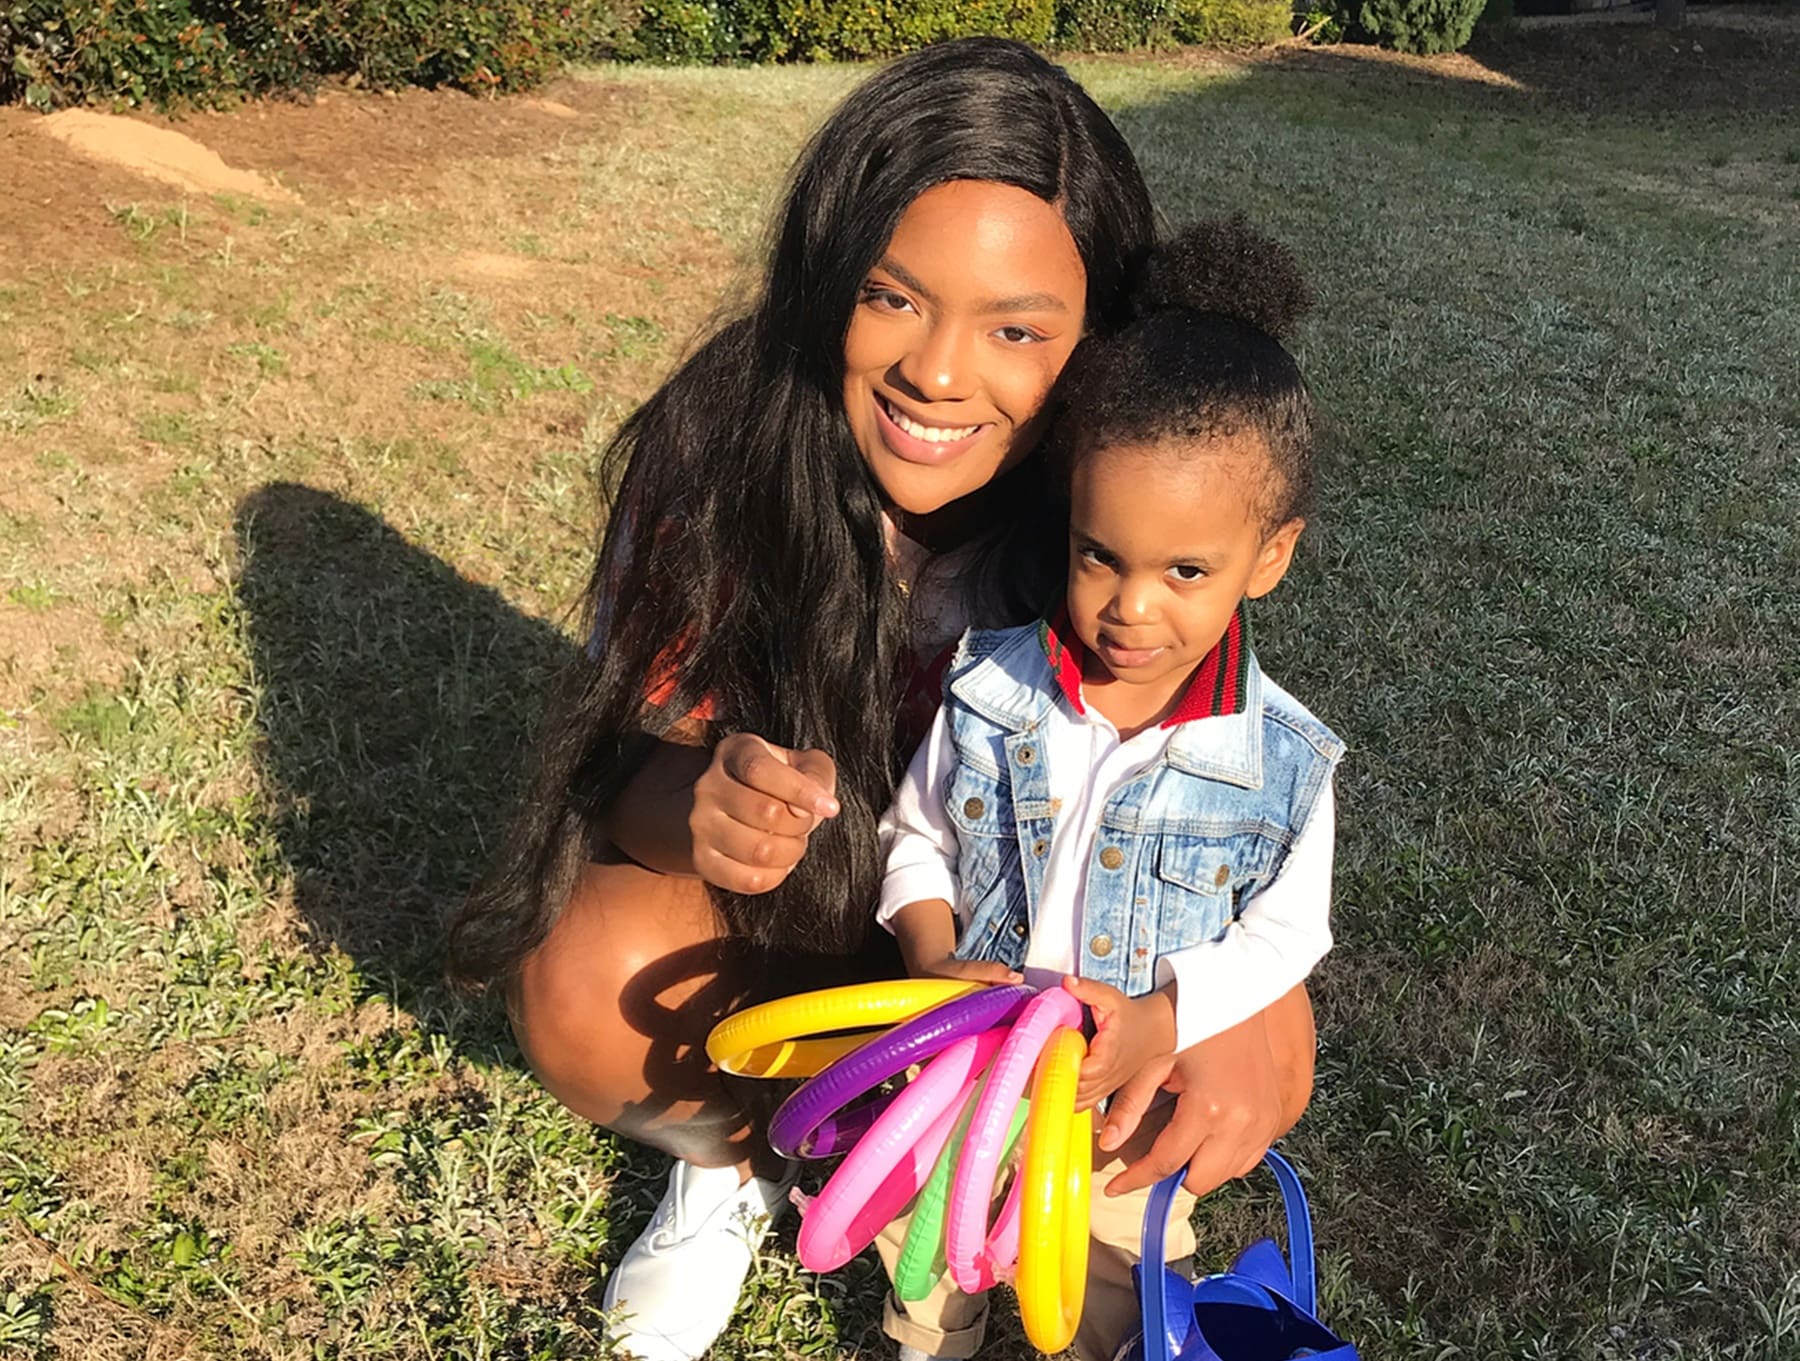 Kandi Burruss Shares The Cutest Photo With Her Daughter Riley Burruss And Son, Ace Wells Tucker - Fans Criticize Her For Not Being Home Enough